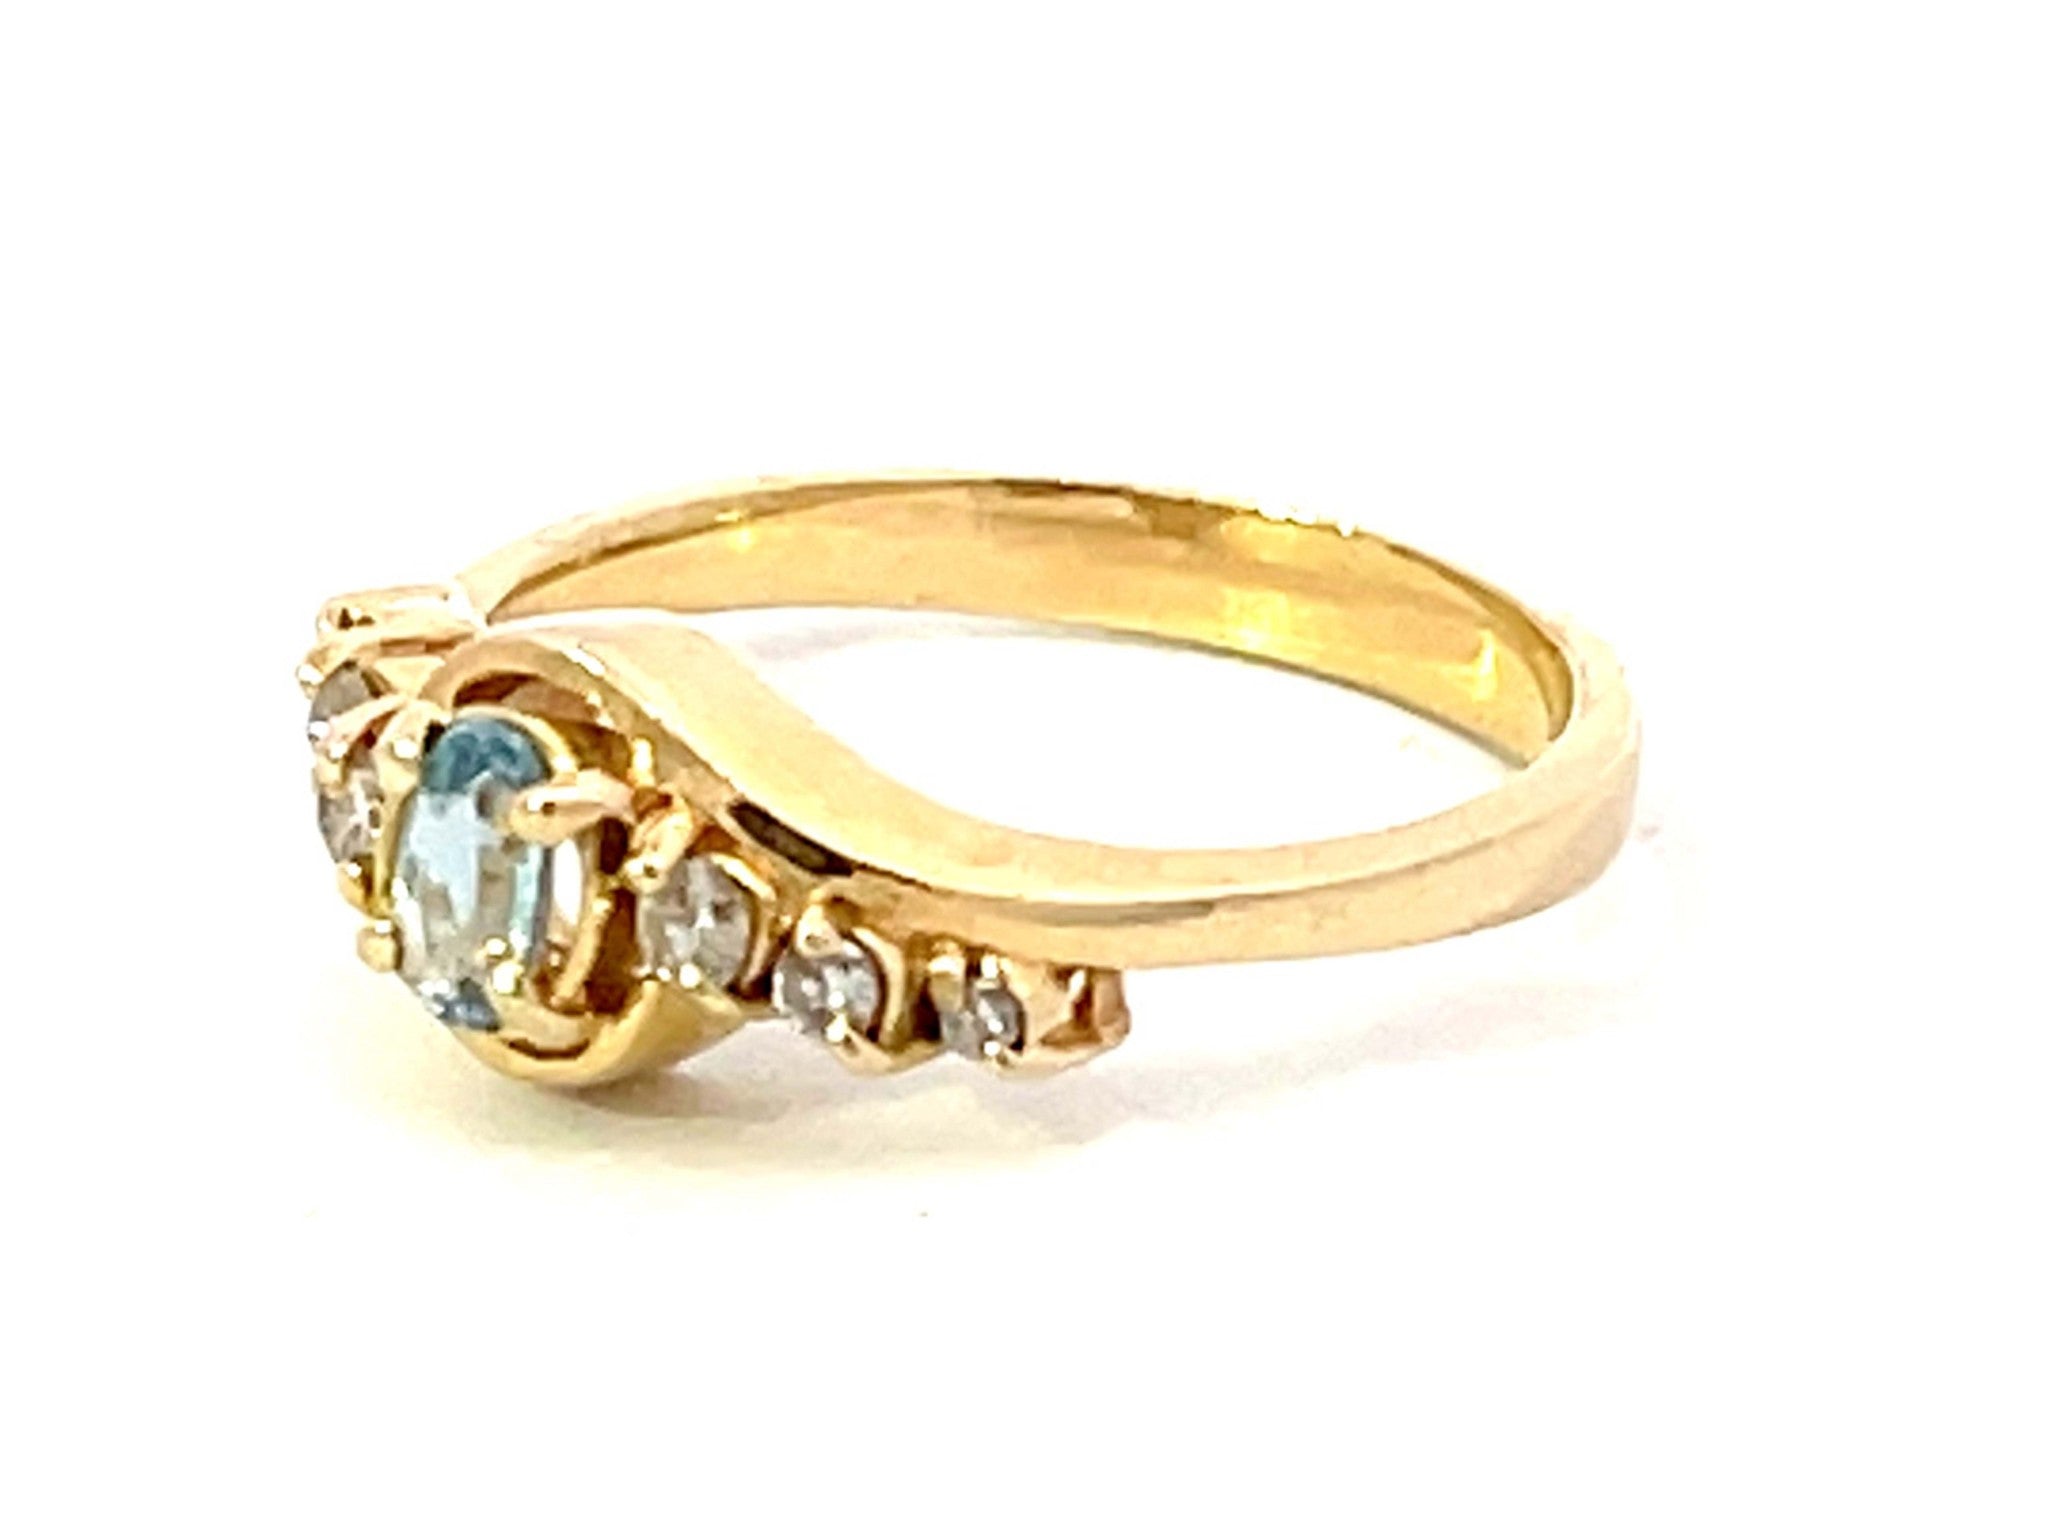 Oval Aquamarine and Diamond Ring in 14k Yellow Gold